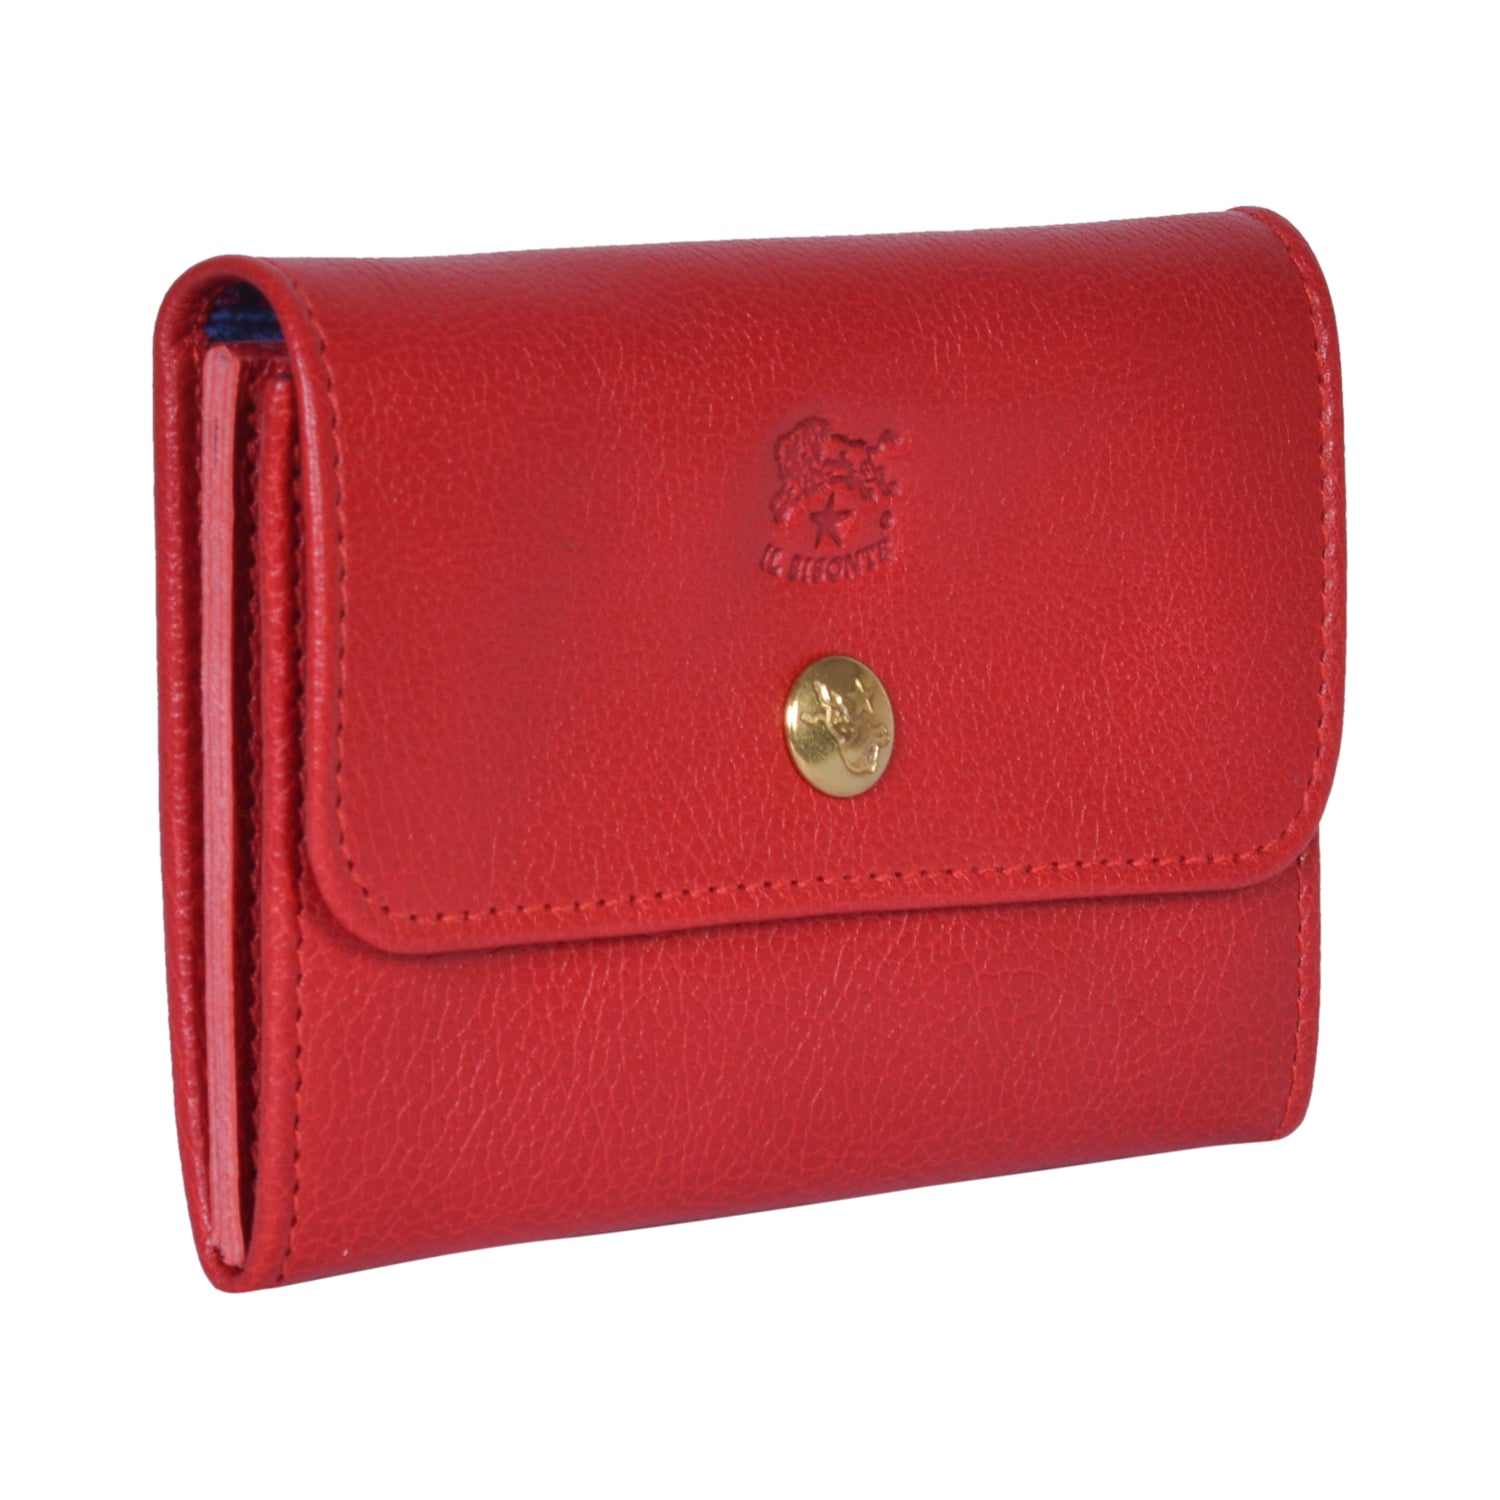 IL BISONTE LIBERTY WOMEN'S  WALLET  IN RED GRAIN COWHIDE LEATHER